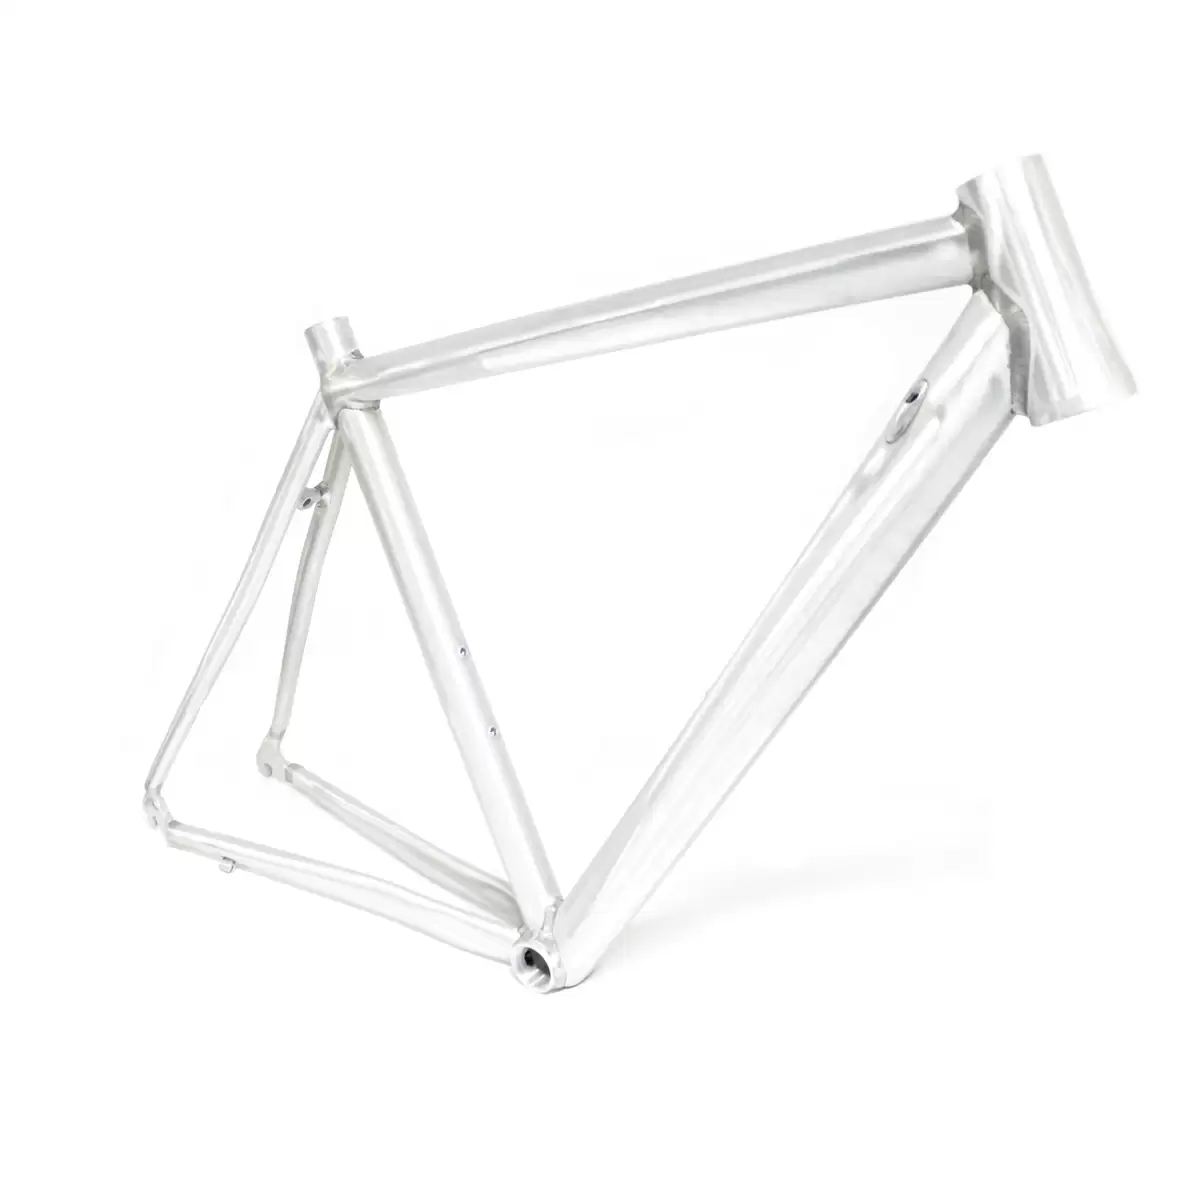 Road alloy tapered Caliper Frame size 53 - image